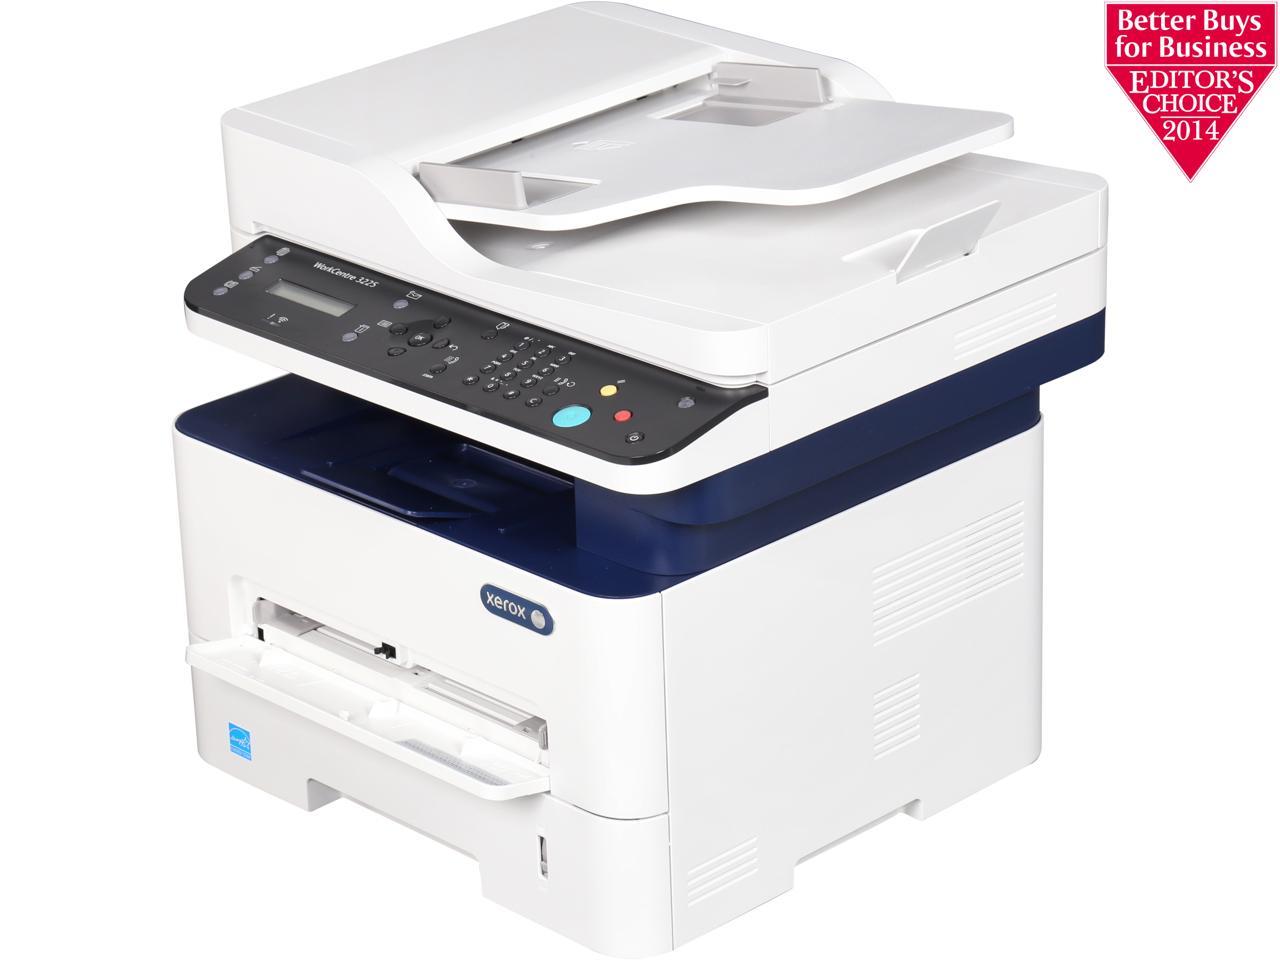 Cimitir scurtarea respirației Modest  Xerox WorkCentre 3225/DNI Black and White Multifunction Printer,  Print/Copy/Scan/Fax, Letter/Legal, Up To 29ppm, 2-Sided Print,  USB/Ethernet/Wireless, 250-Sheet Tray - Newegg.com